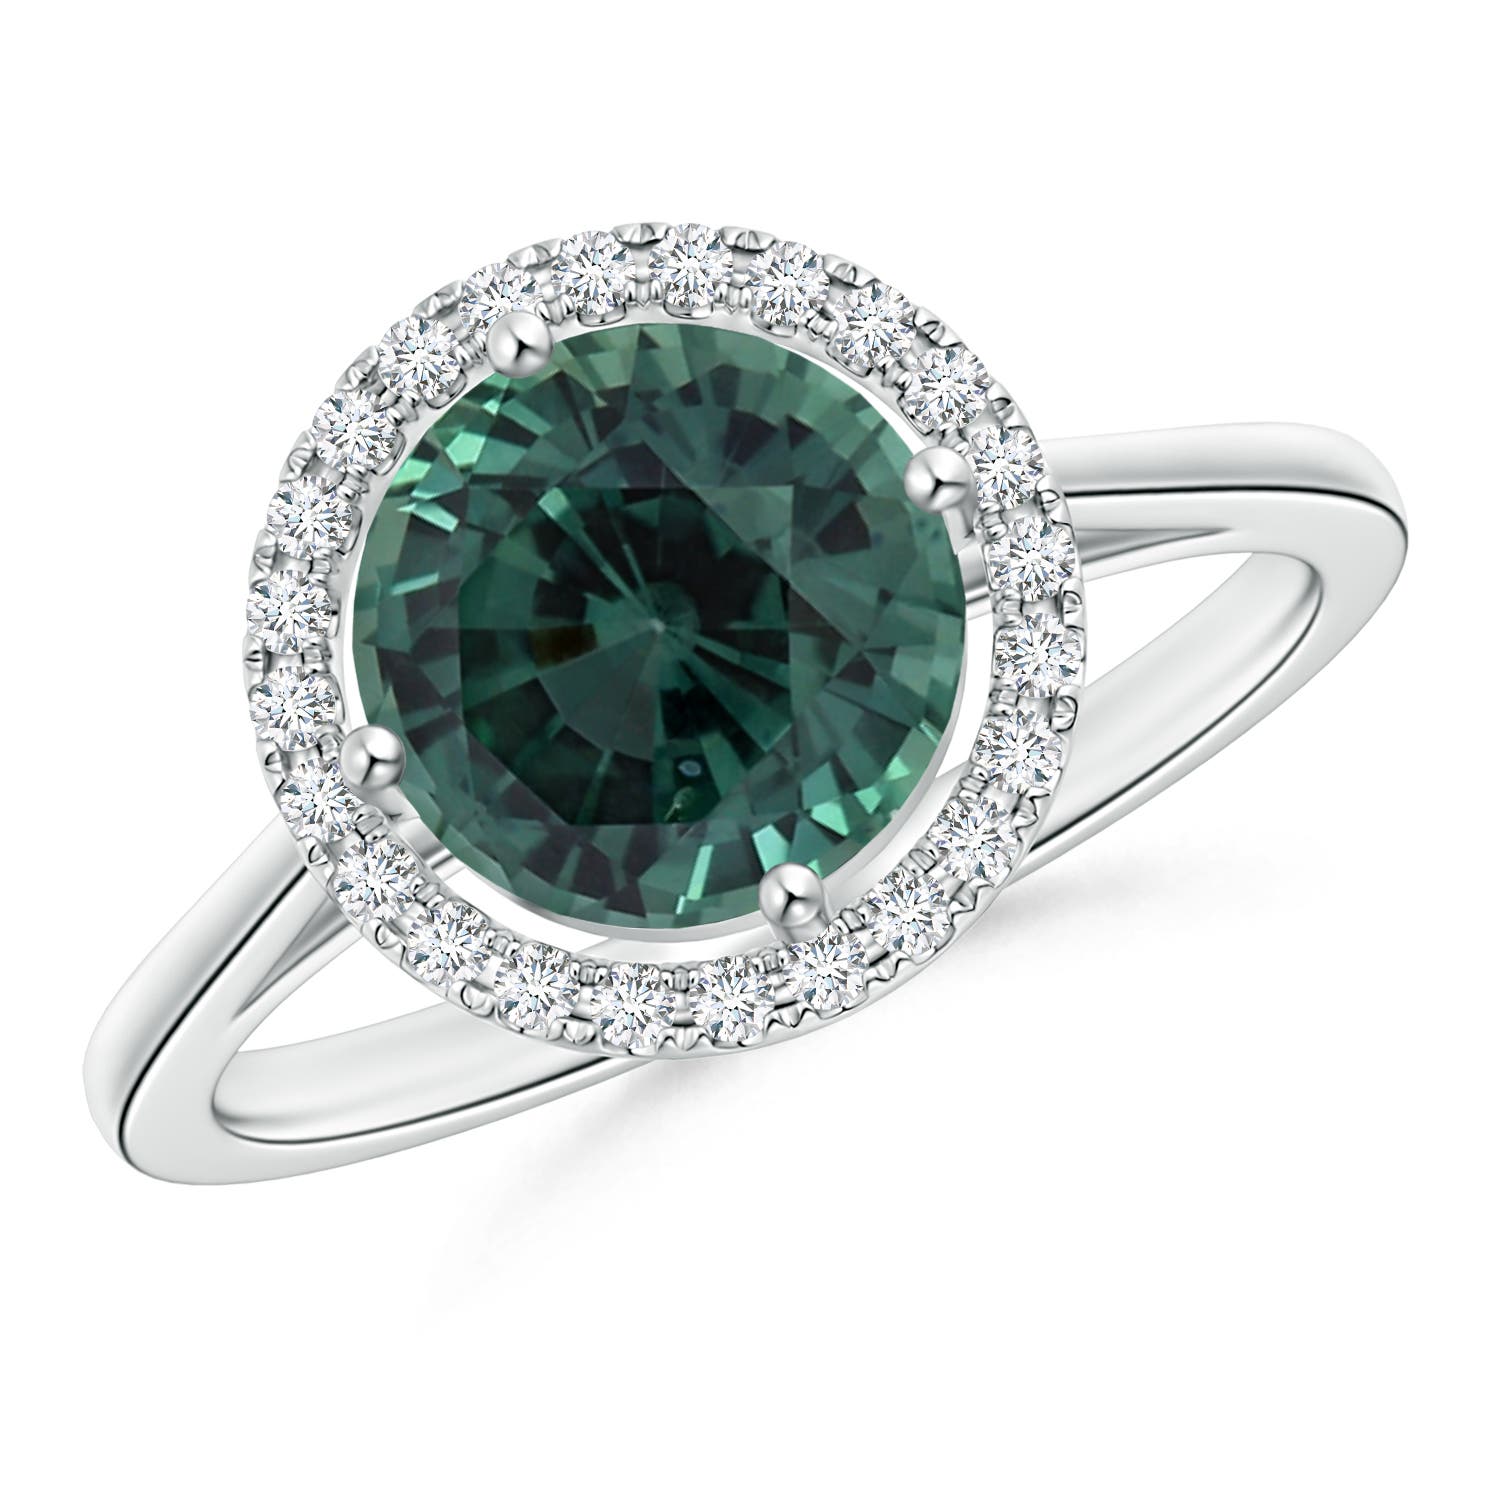 Floating GIA Certified Round Teal montana sapphire Ring with Diamond Halo